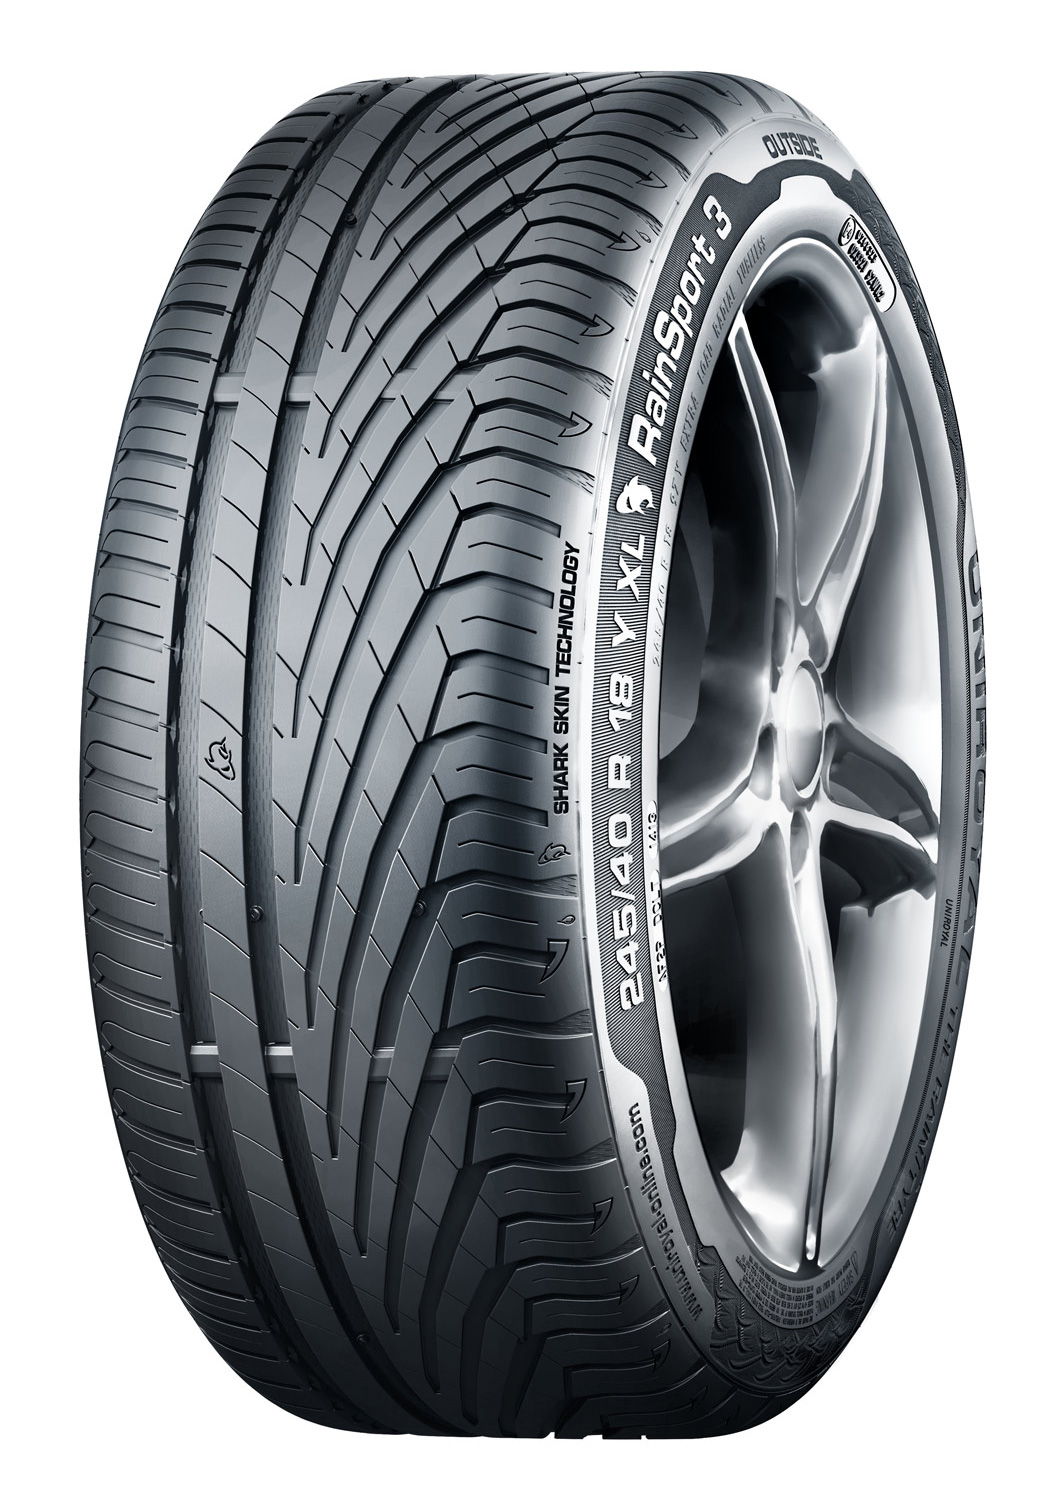 Buy cheap Uniroyal RainSport 3 SUV tyres from your local Setyres